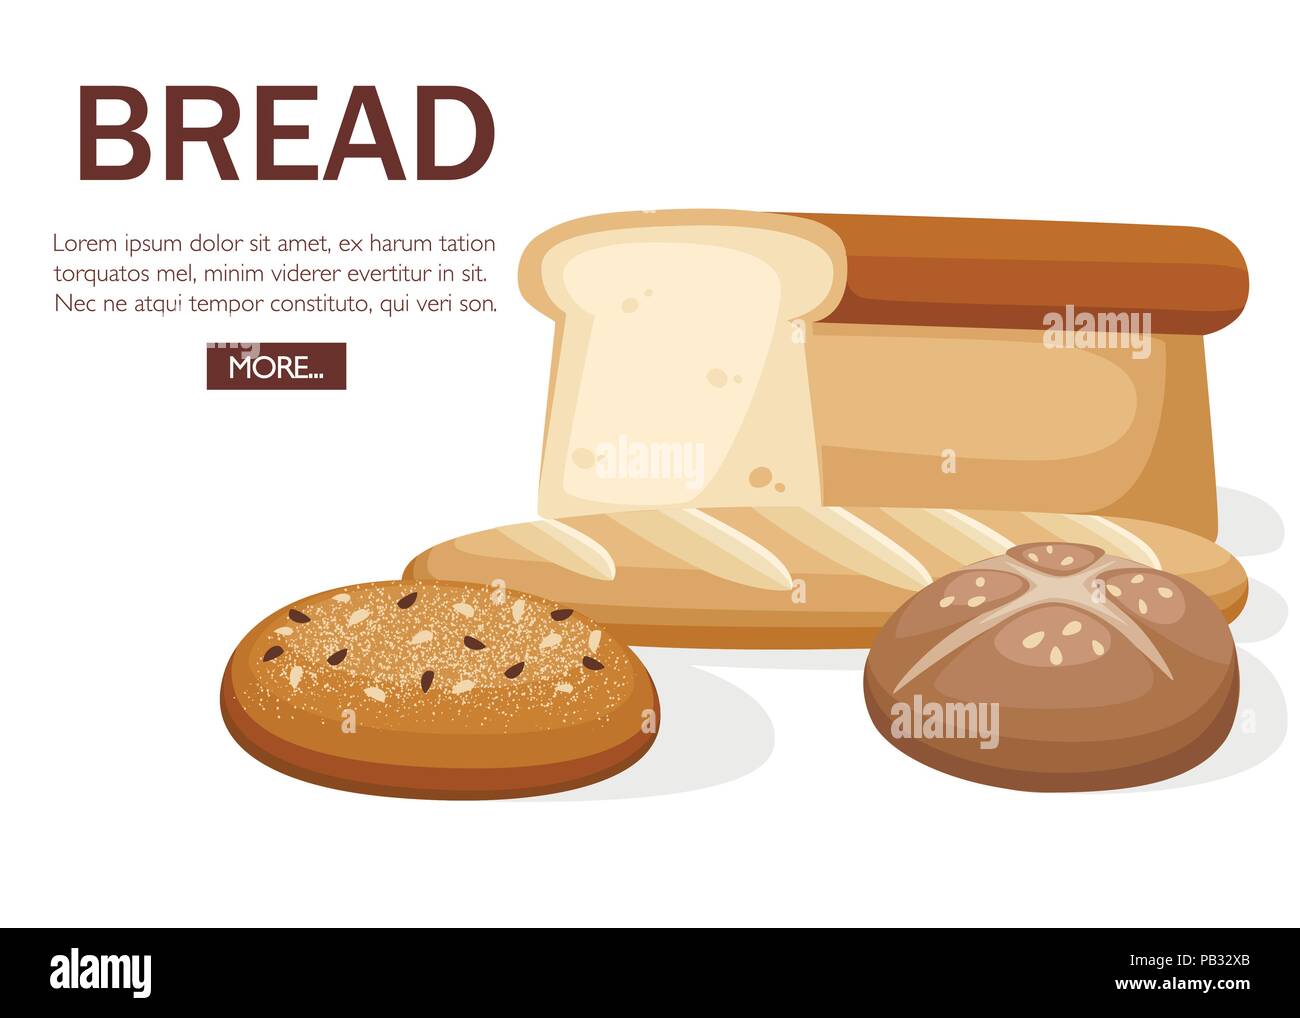 Group of bakery bread. Wheat bread, french baguette, ciabatta, toast bread. Concept design for bakery. Flat vector illustration on white background. D Stock Vector